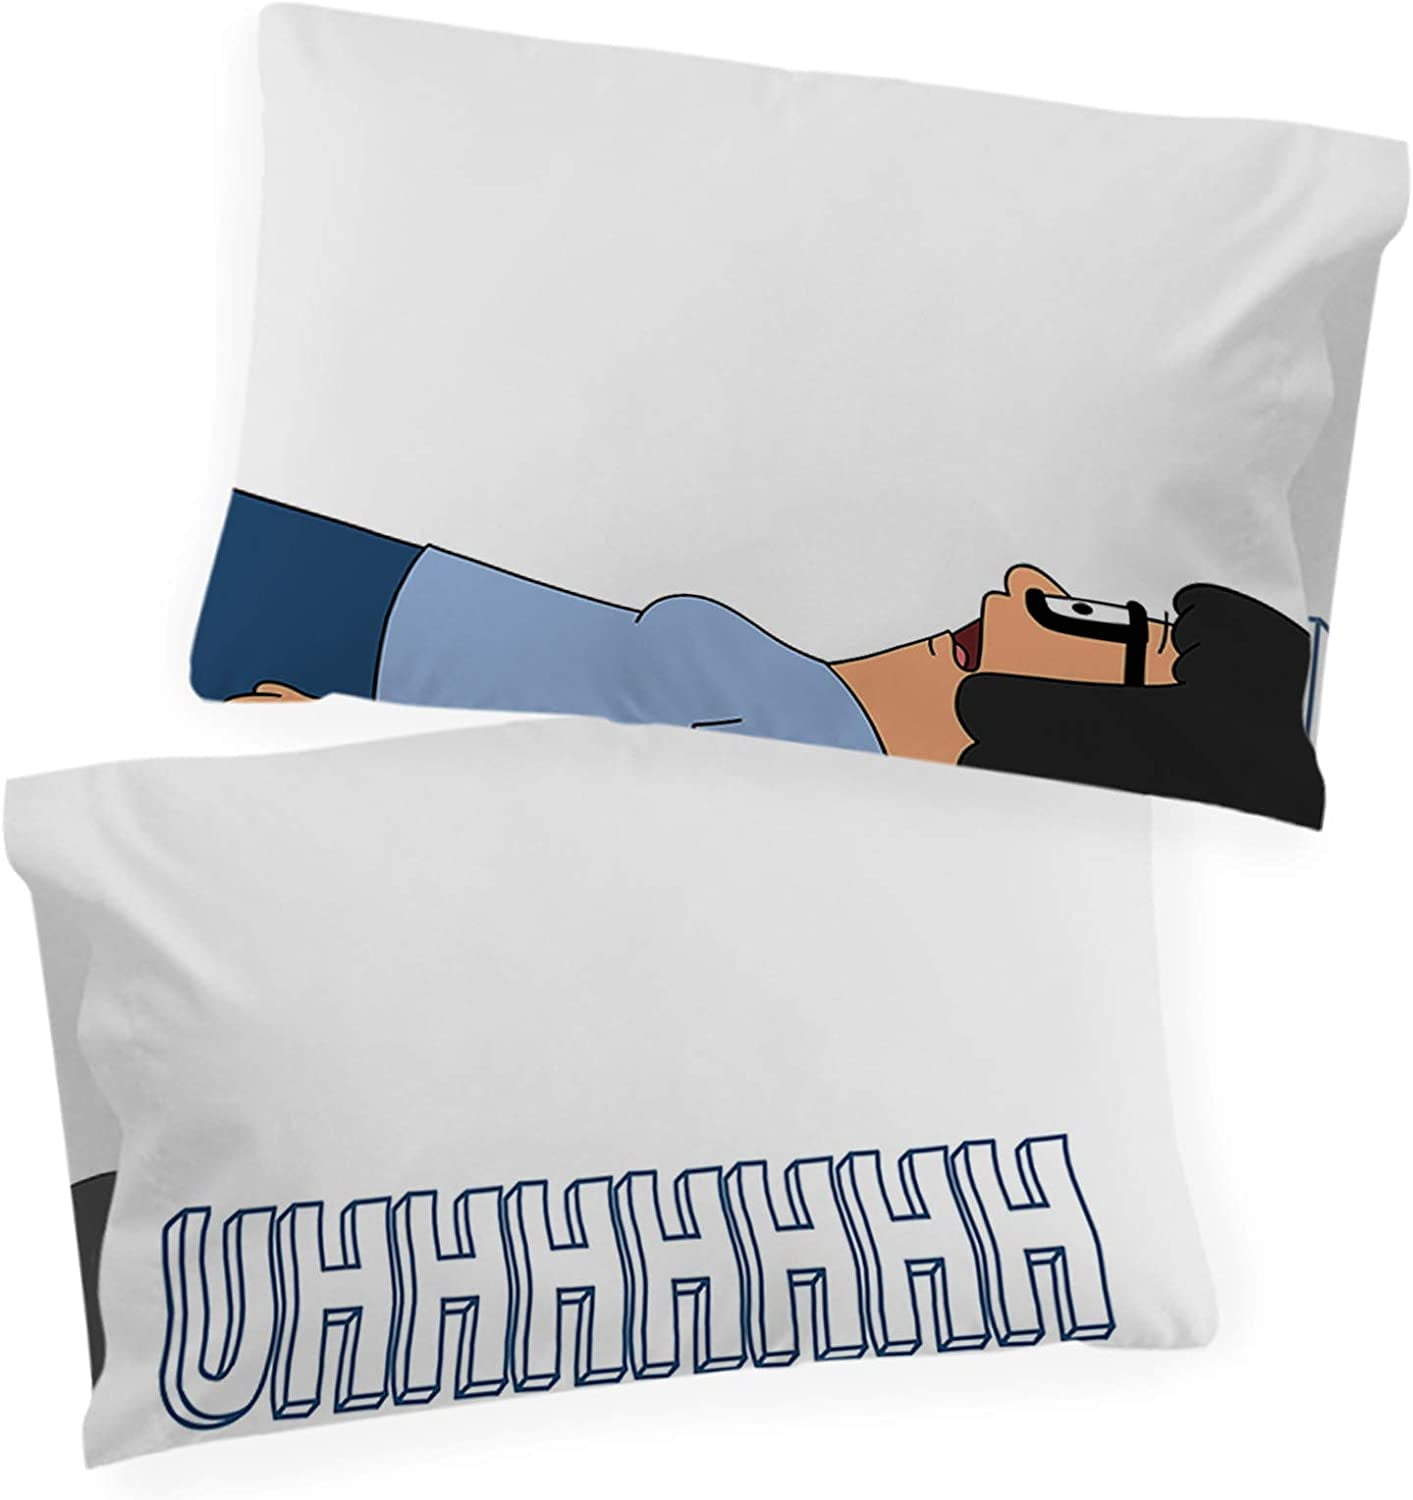 Jay Franco Bobs Burgers Lineart 1 Single Reversible Pillowcase Features The Belcher Family Double-Sided Official Bobs Burgers Product Super Soft Bedding